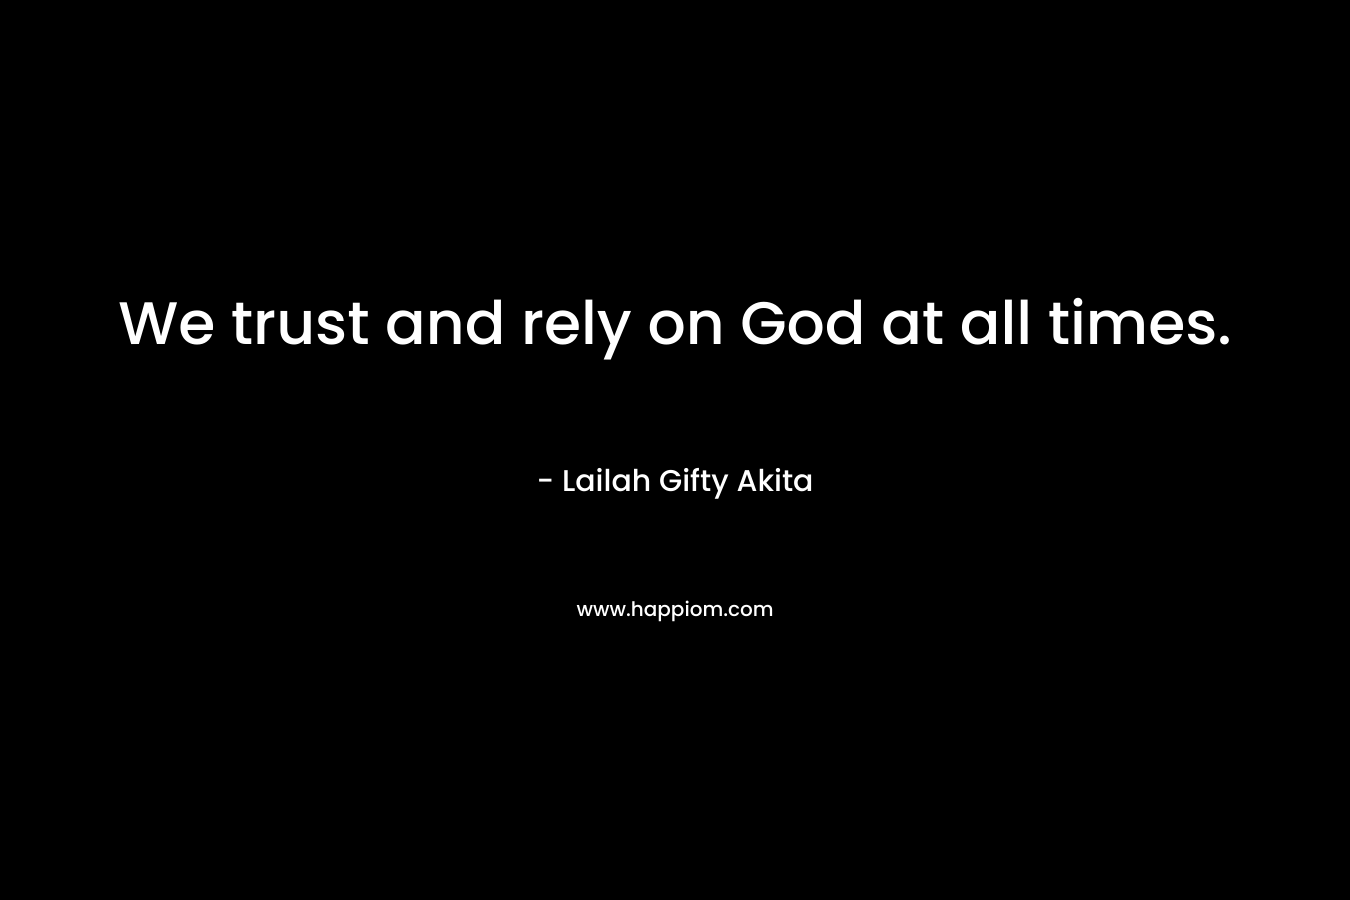 We trust and rely on God at all times.